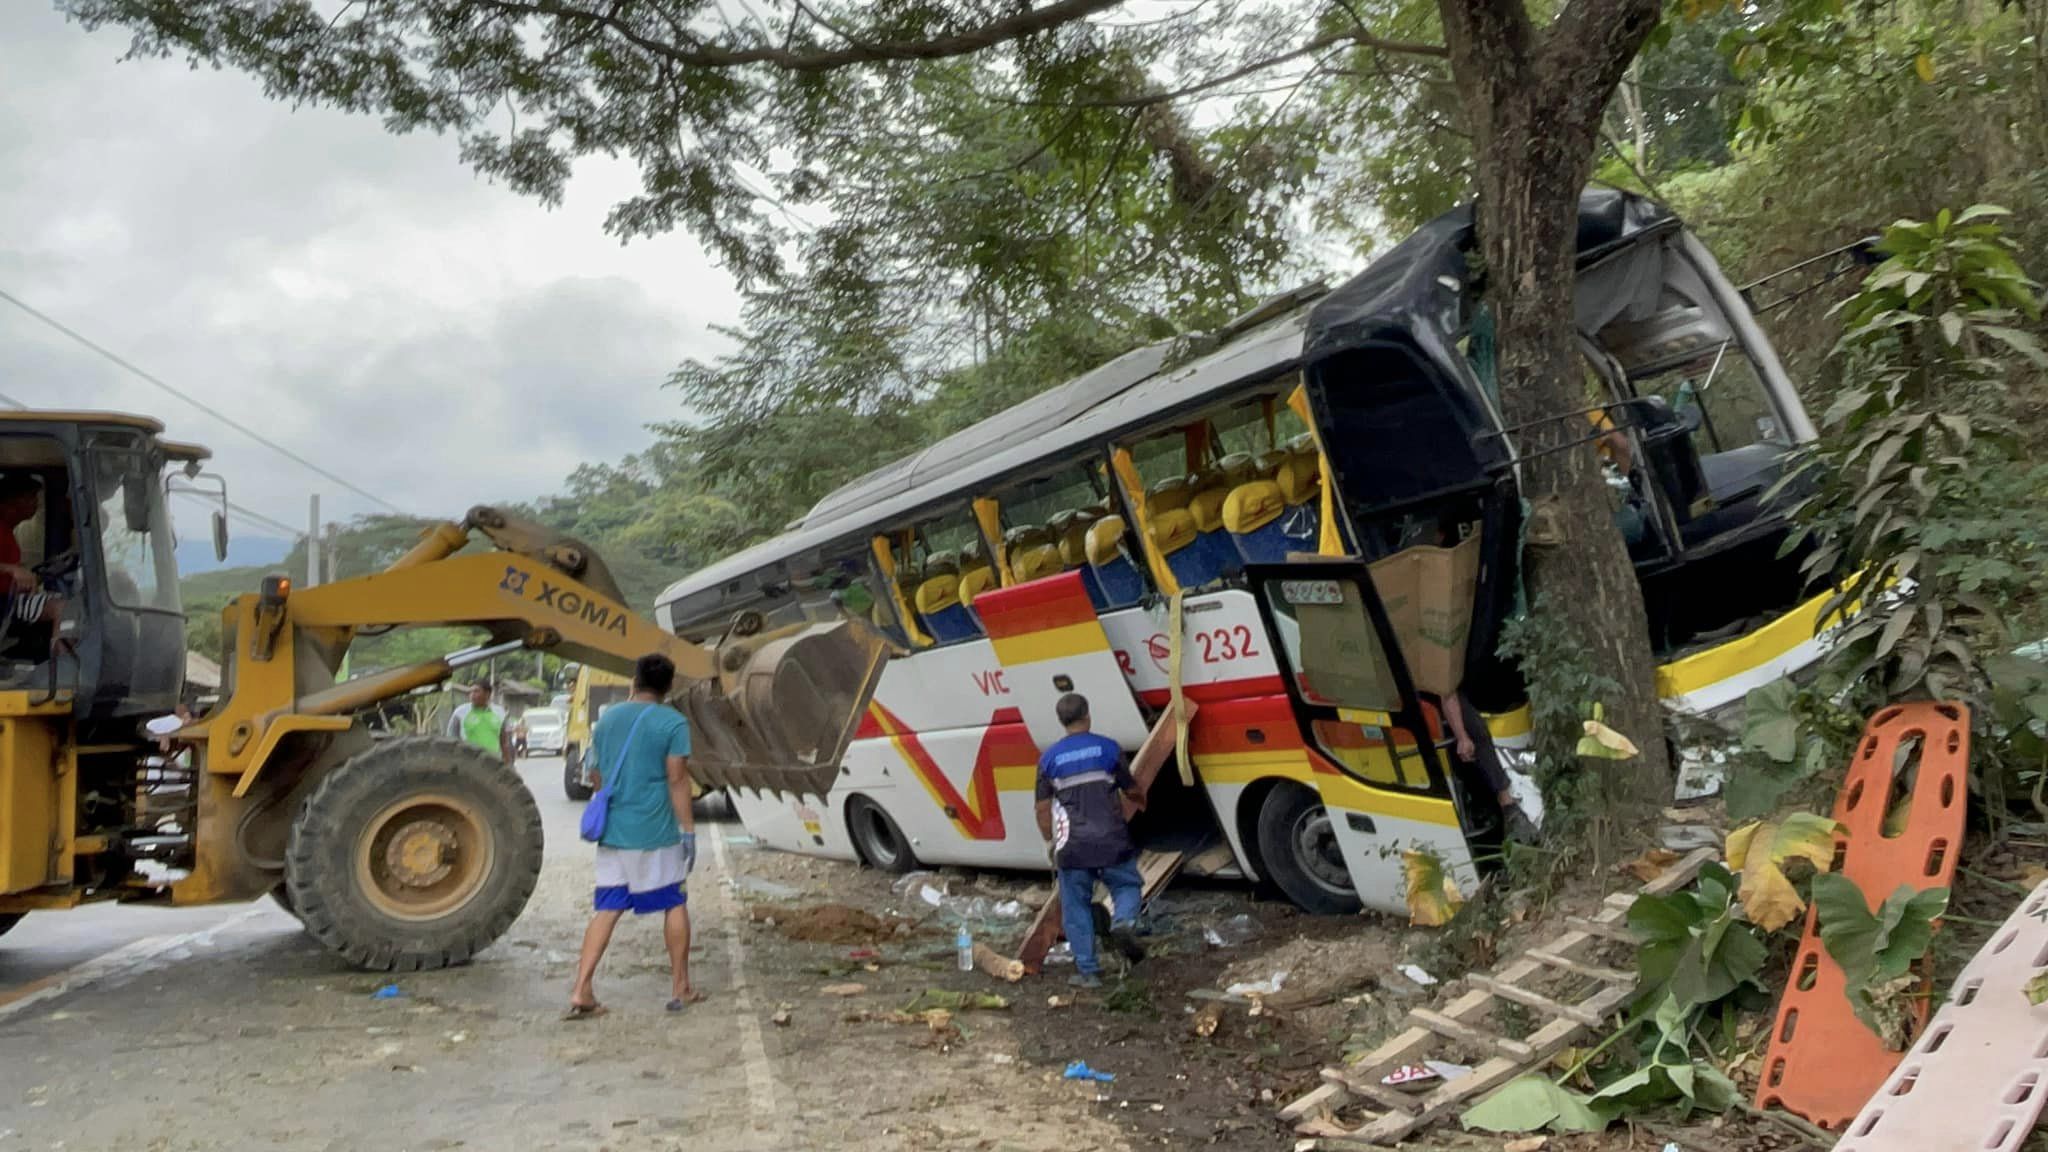 A passenger bus traveling from Baguio City to Quezon City crashed after it skidded on a highway in Pugo town in La Union province on Tuesday morning (Jan. 3), killing the bus conductor and baby, police said.